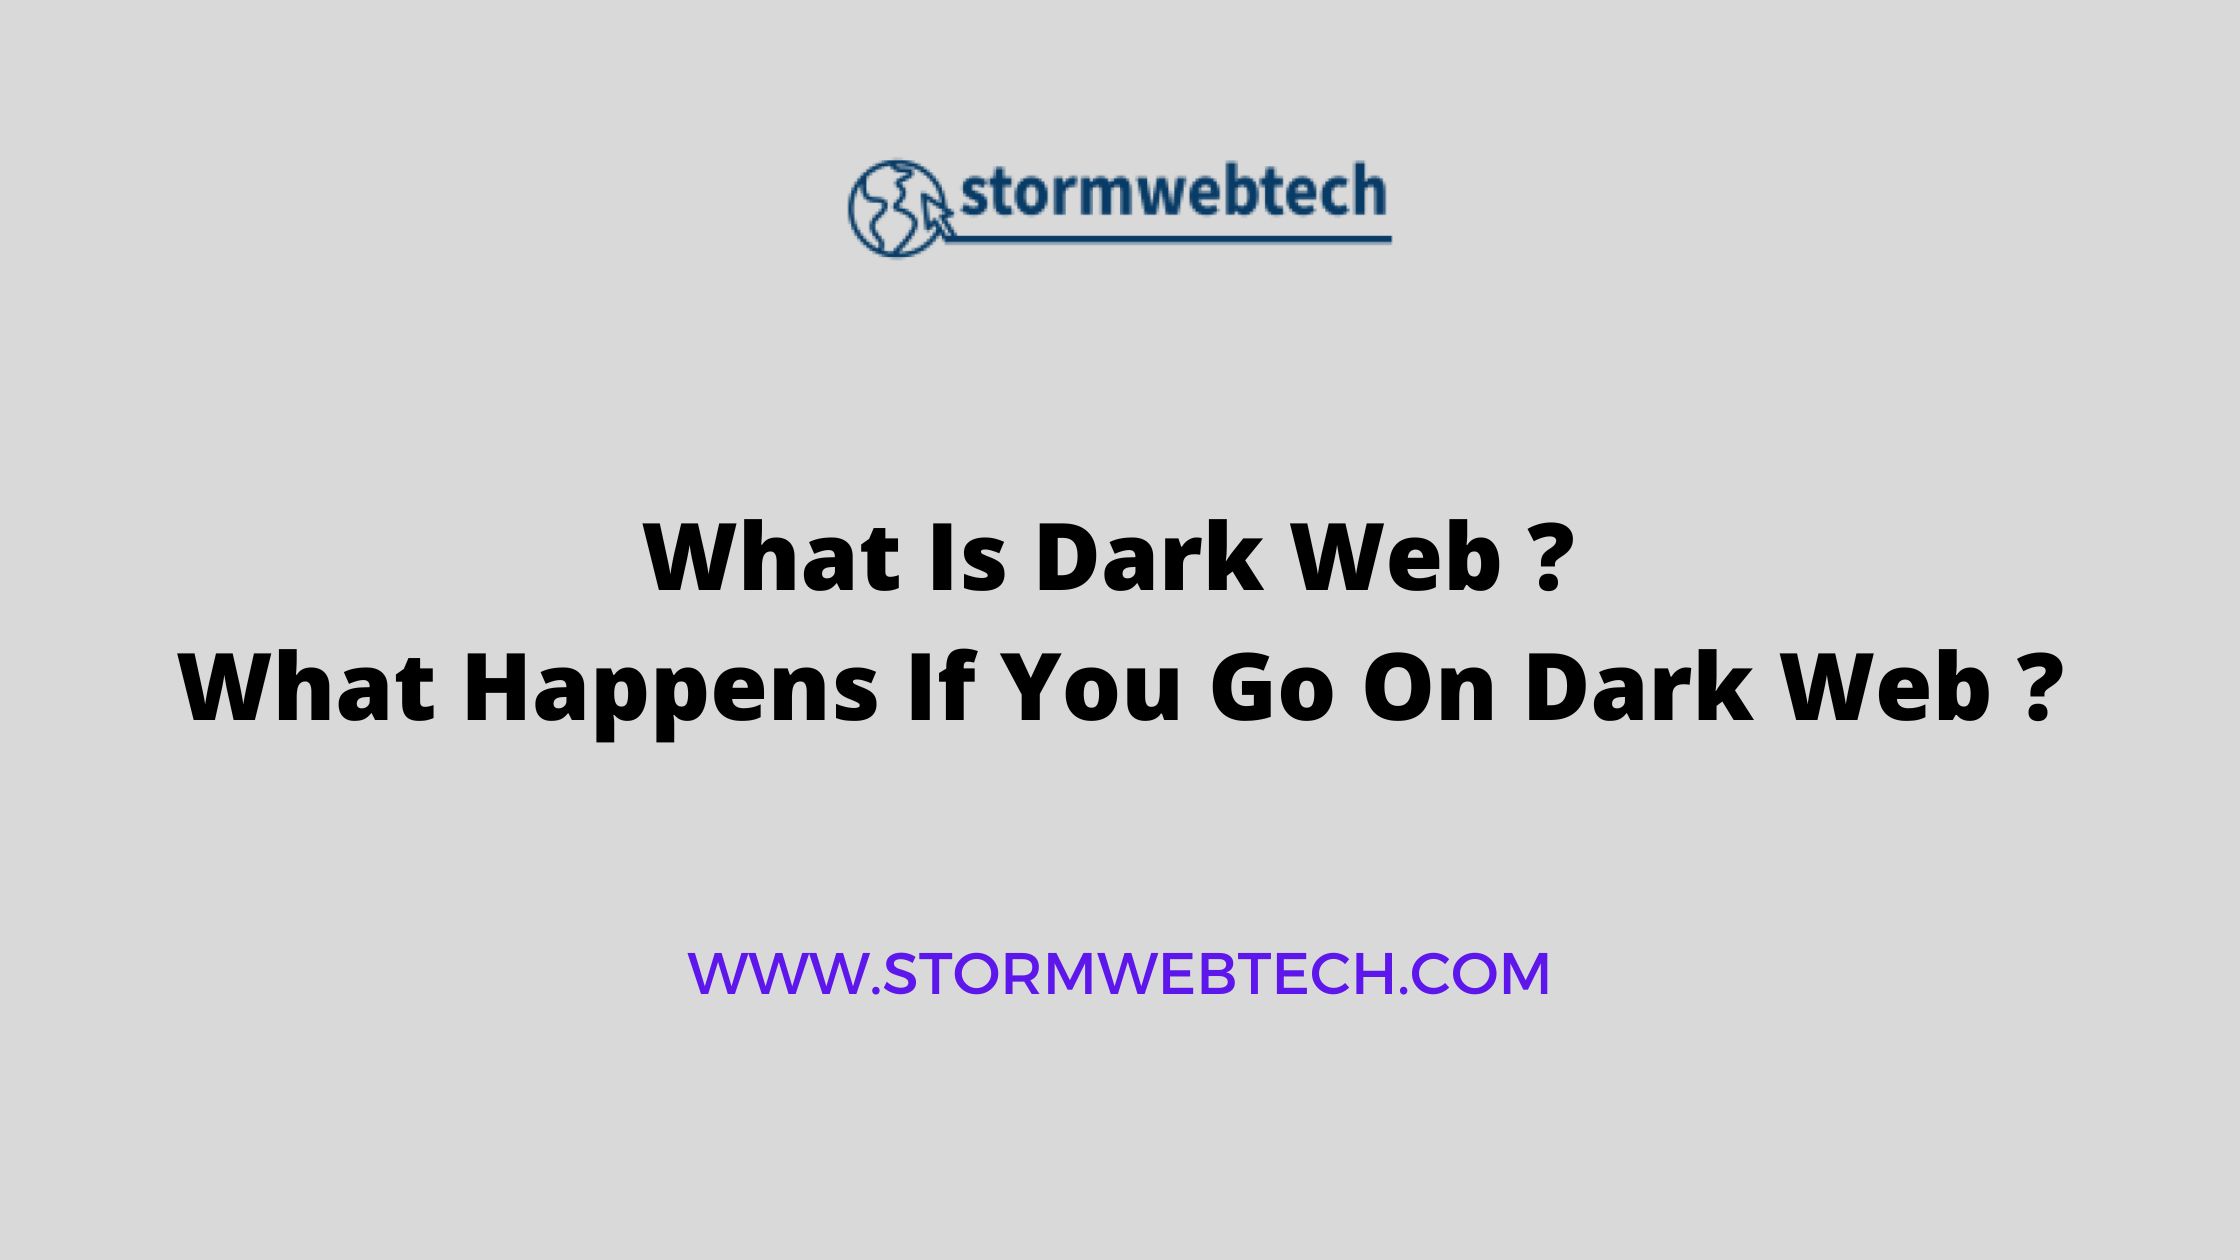 what is dark web, what is dark web used for, what happens if you go on dark web, what is dark web in cyber security, how does dark web works